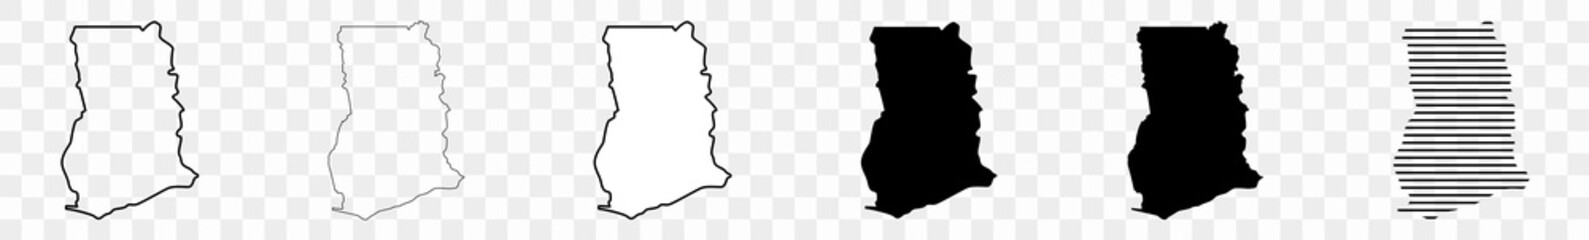 Ghana Map Black | Ghanaian Border | State Country | Transparent Isolated | Variations